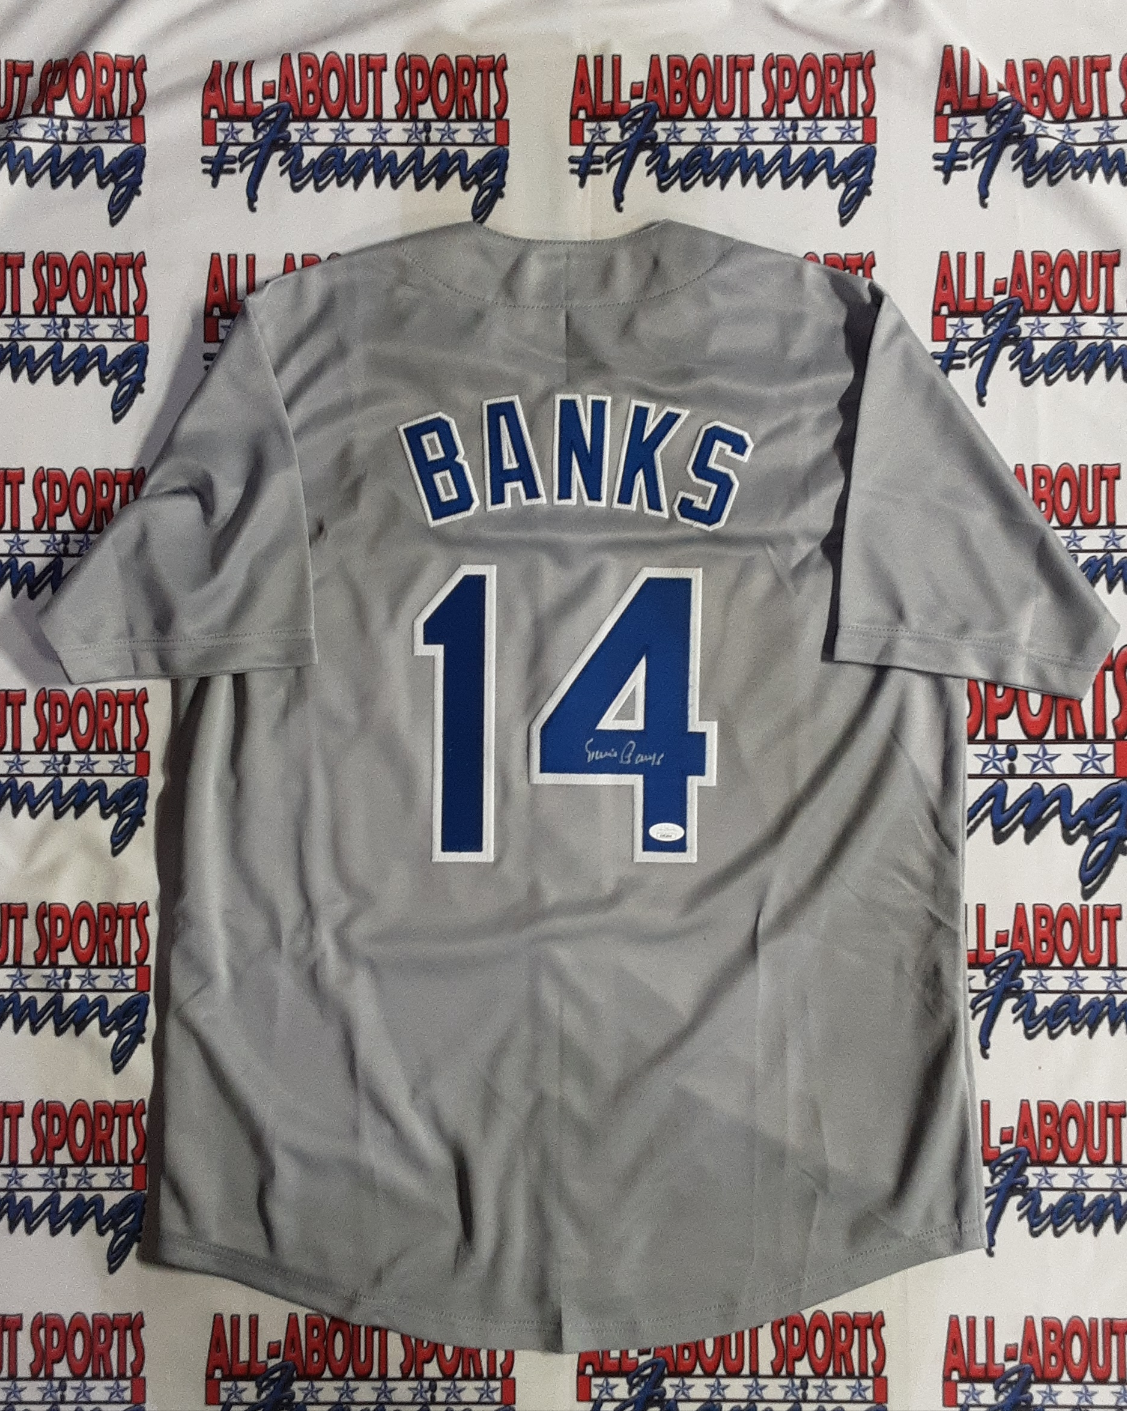 authentic ernie banks jersey